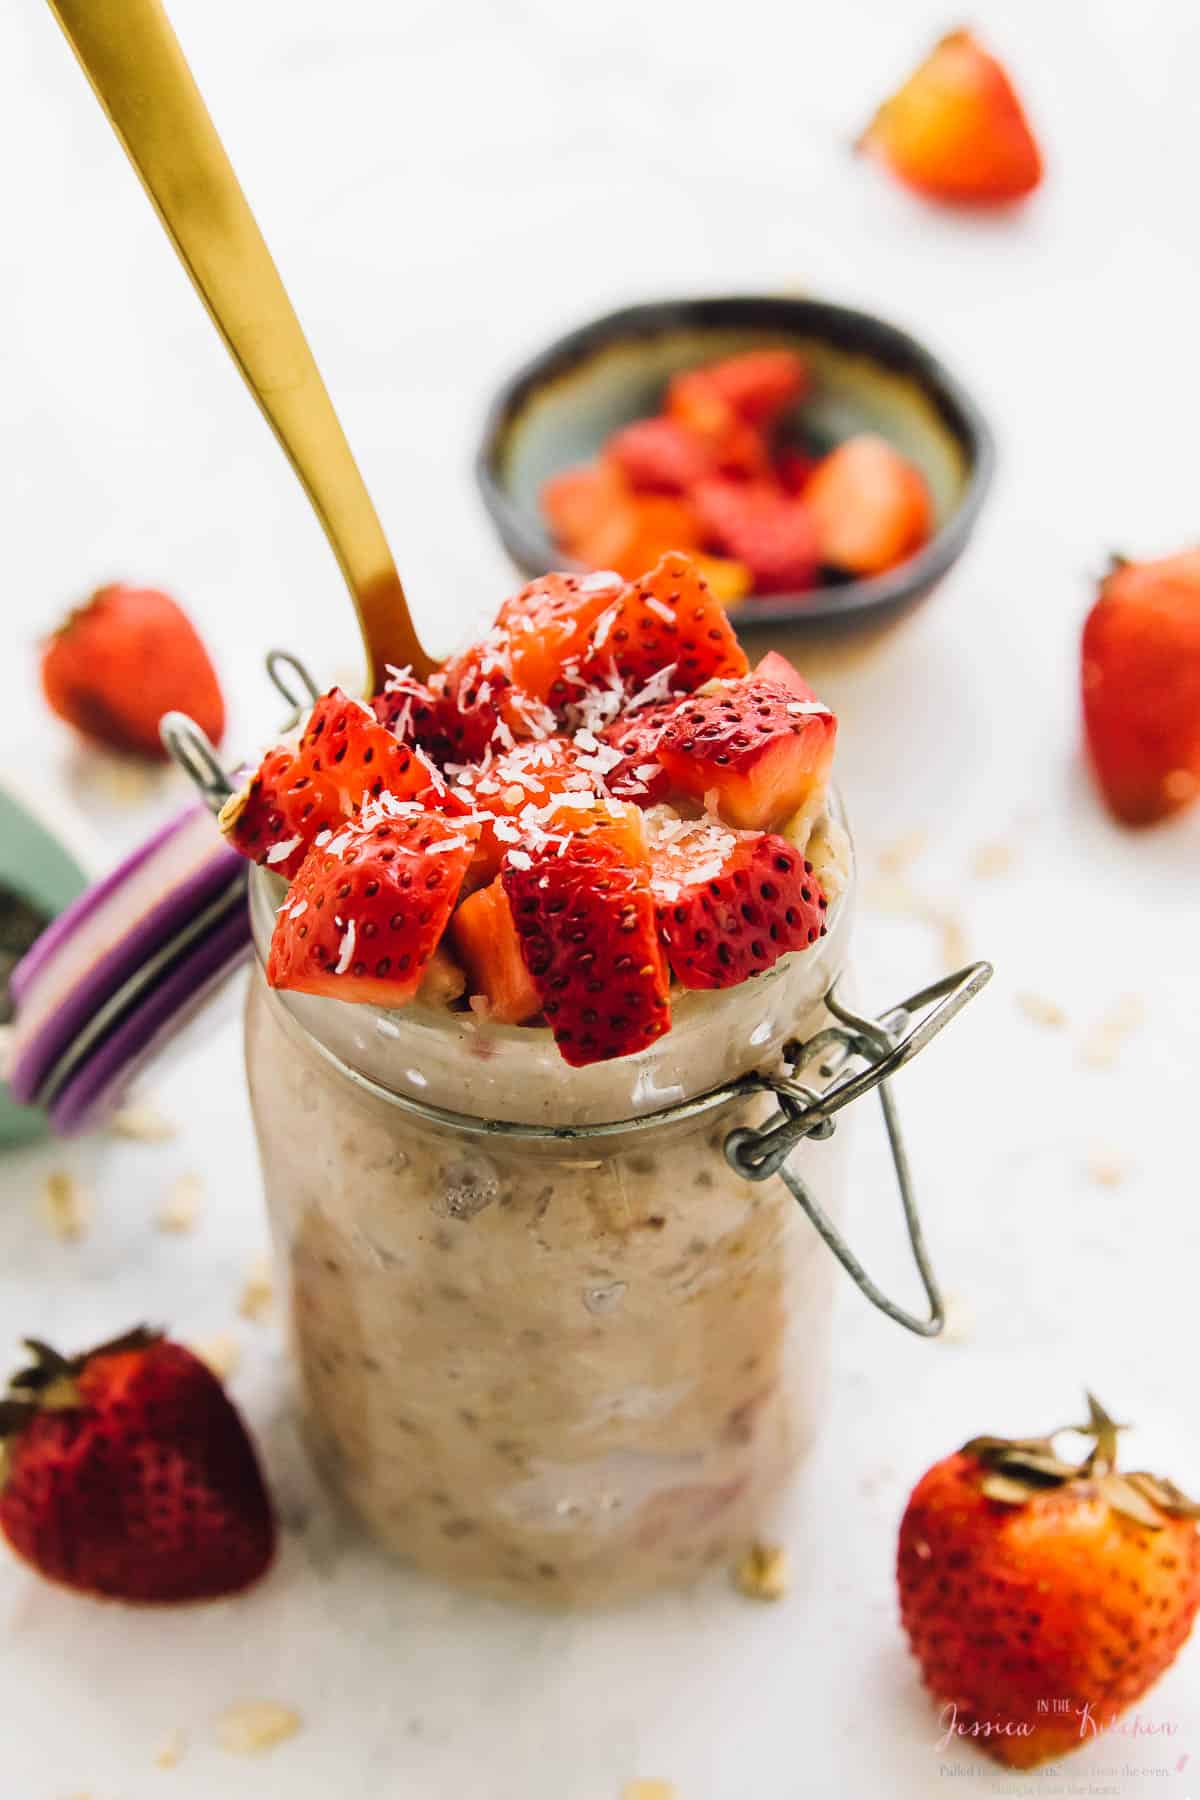 Overnight oats in a glass jar with a gold spoon in it.